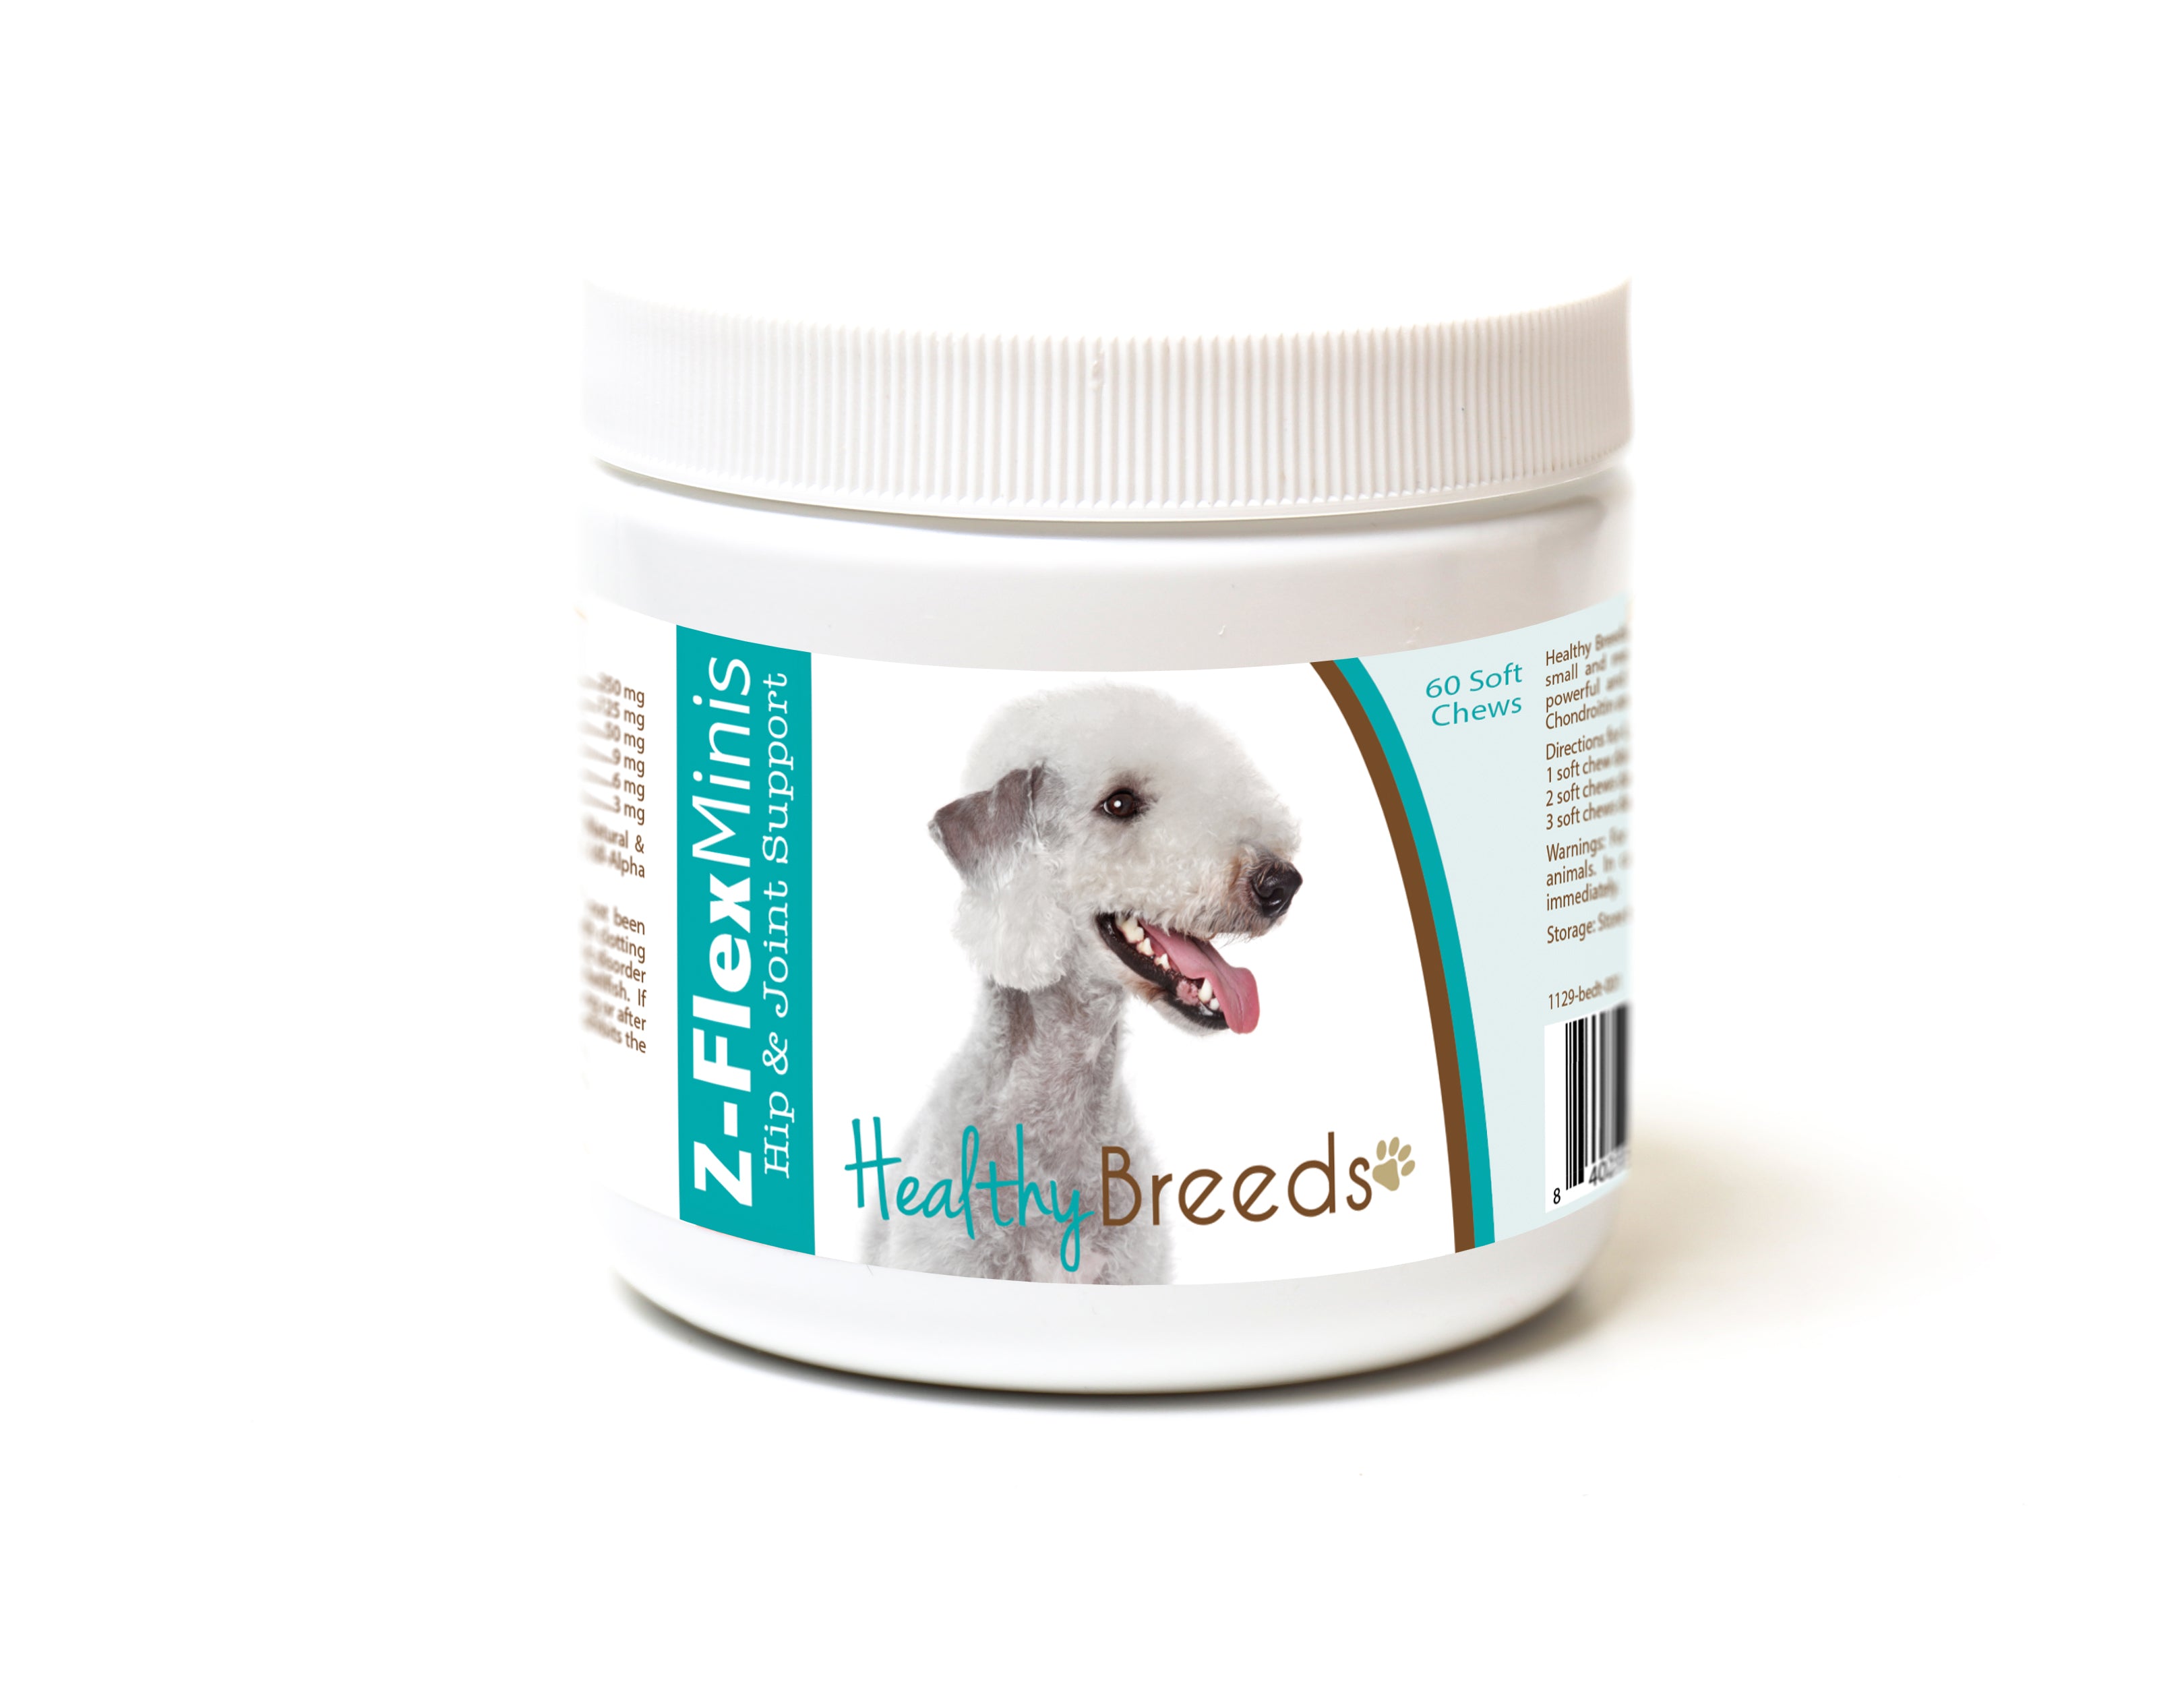 Bedlington Terrier Z-Flex Minis Hip and Joint Support Soft Chews 60 Count